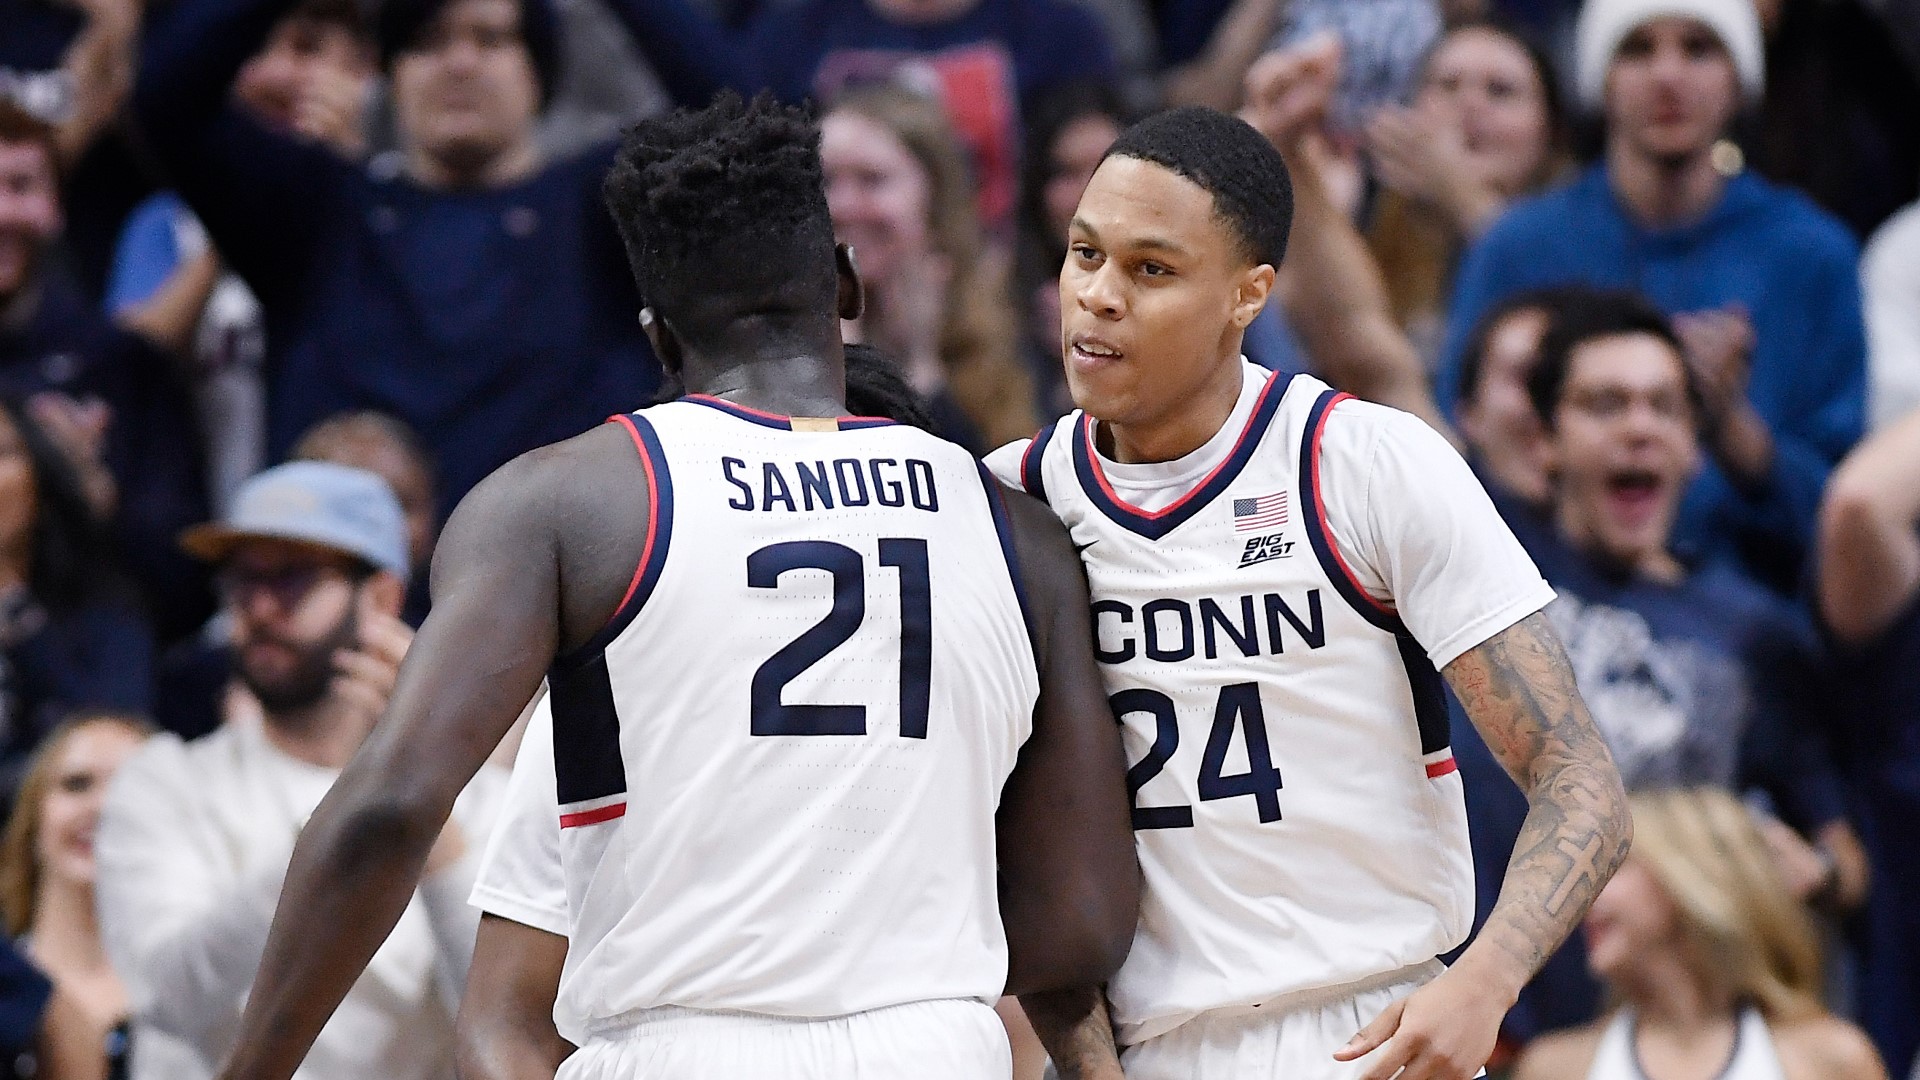 An outstanding season that guaranteed the UConn men’s basketball team its third-straight NCAA Tournament bid culminated with a No. 4 seed in a loaded West Region.